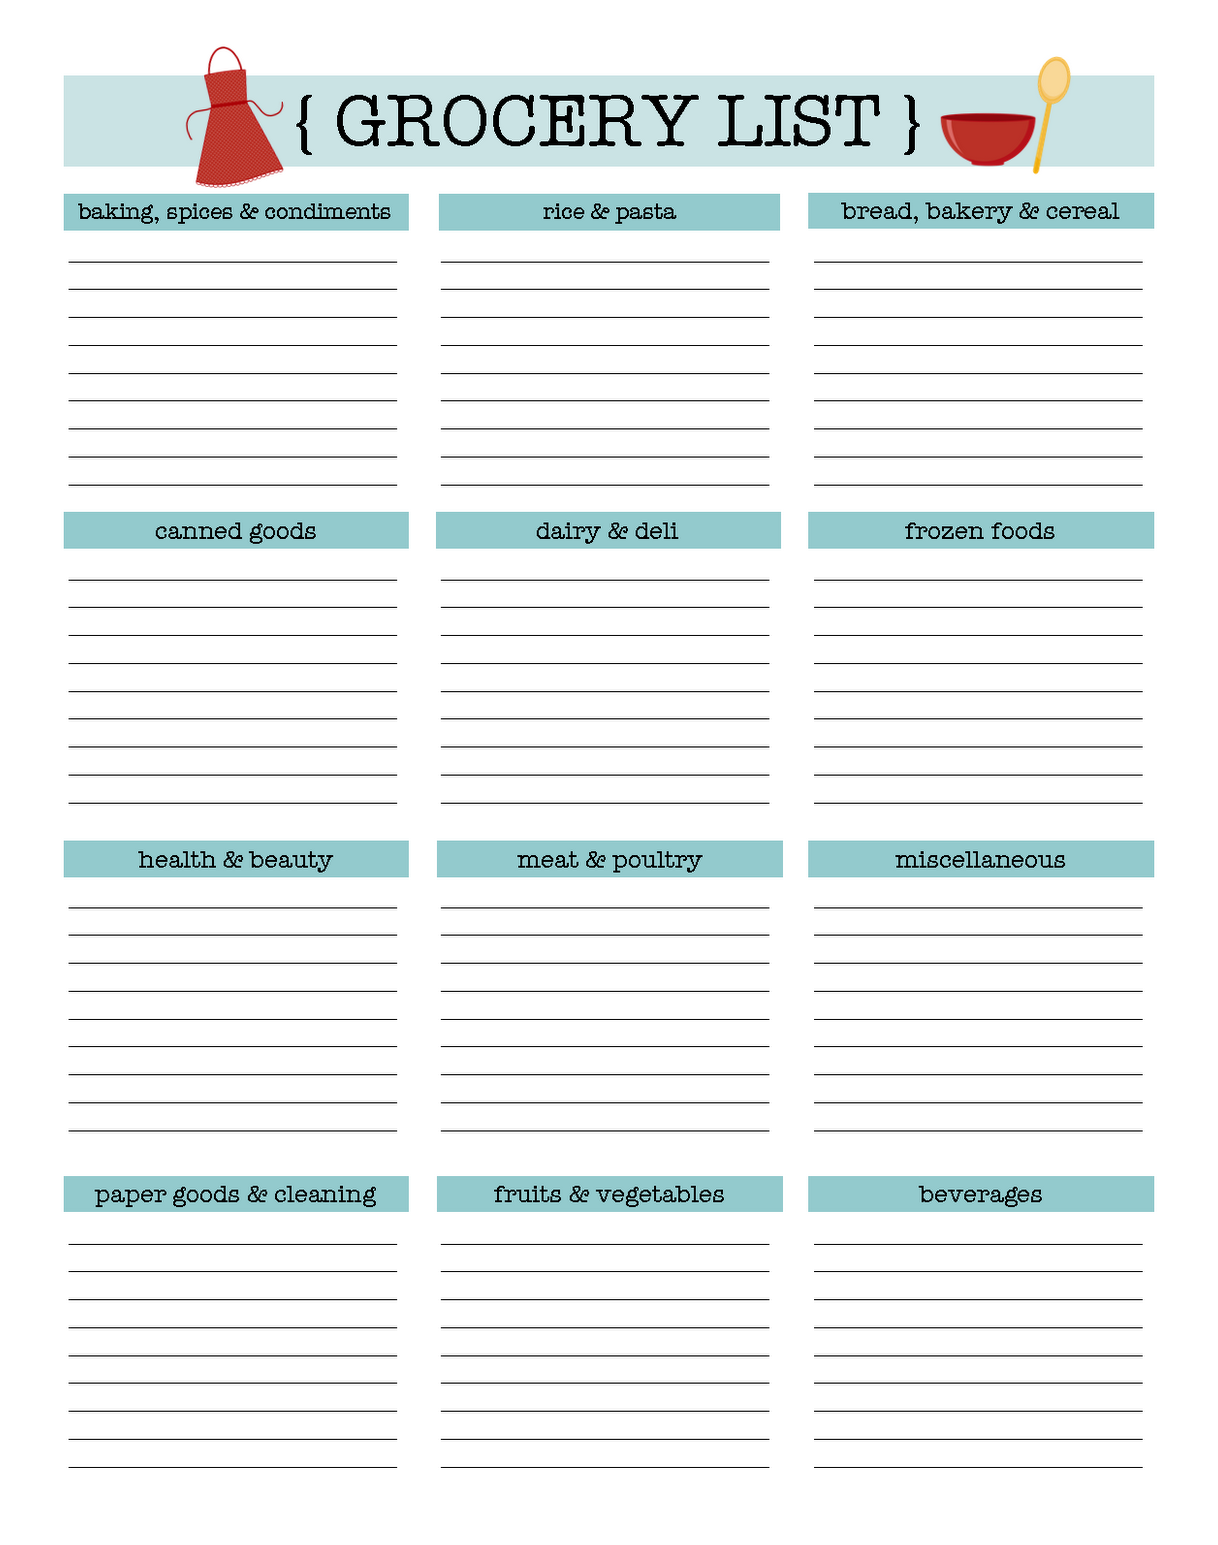 7-grocery-list-template-excel-sample-excel-templates